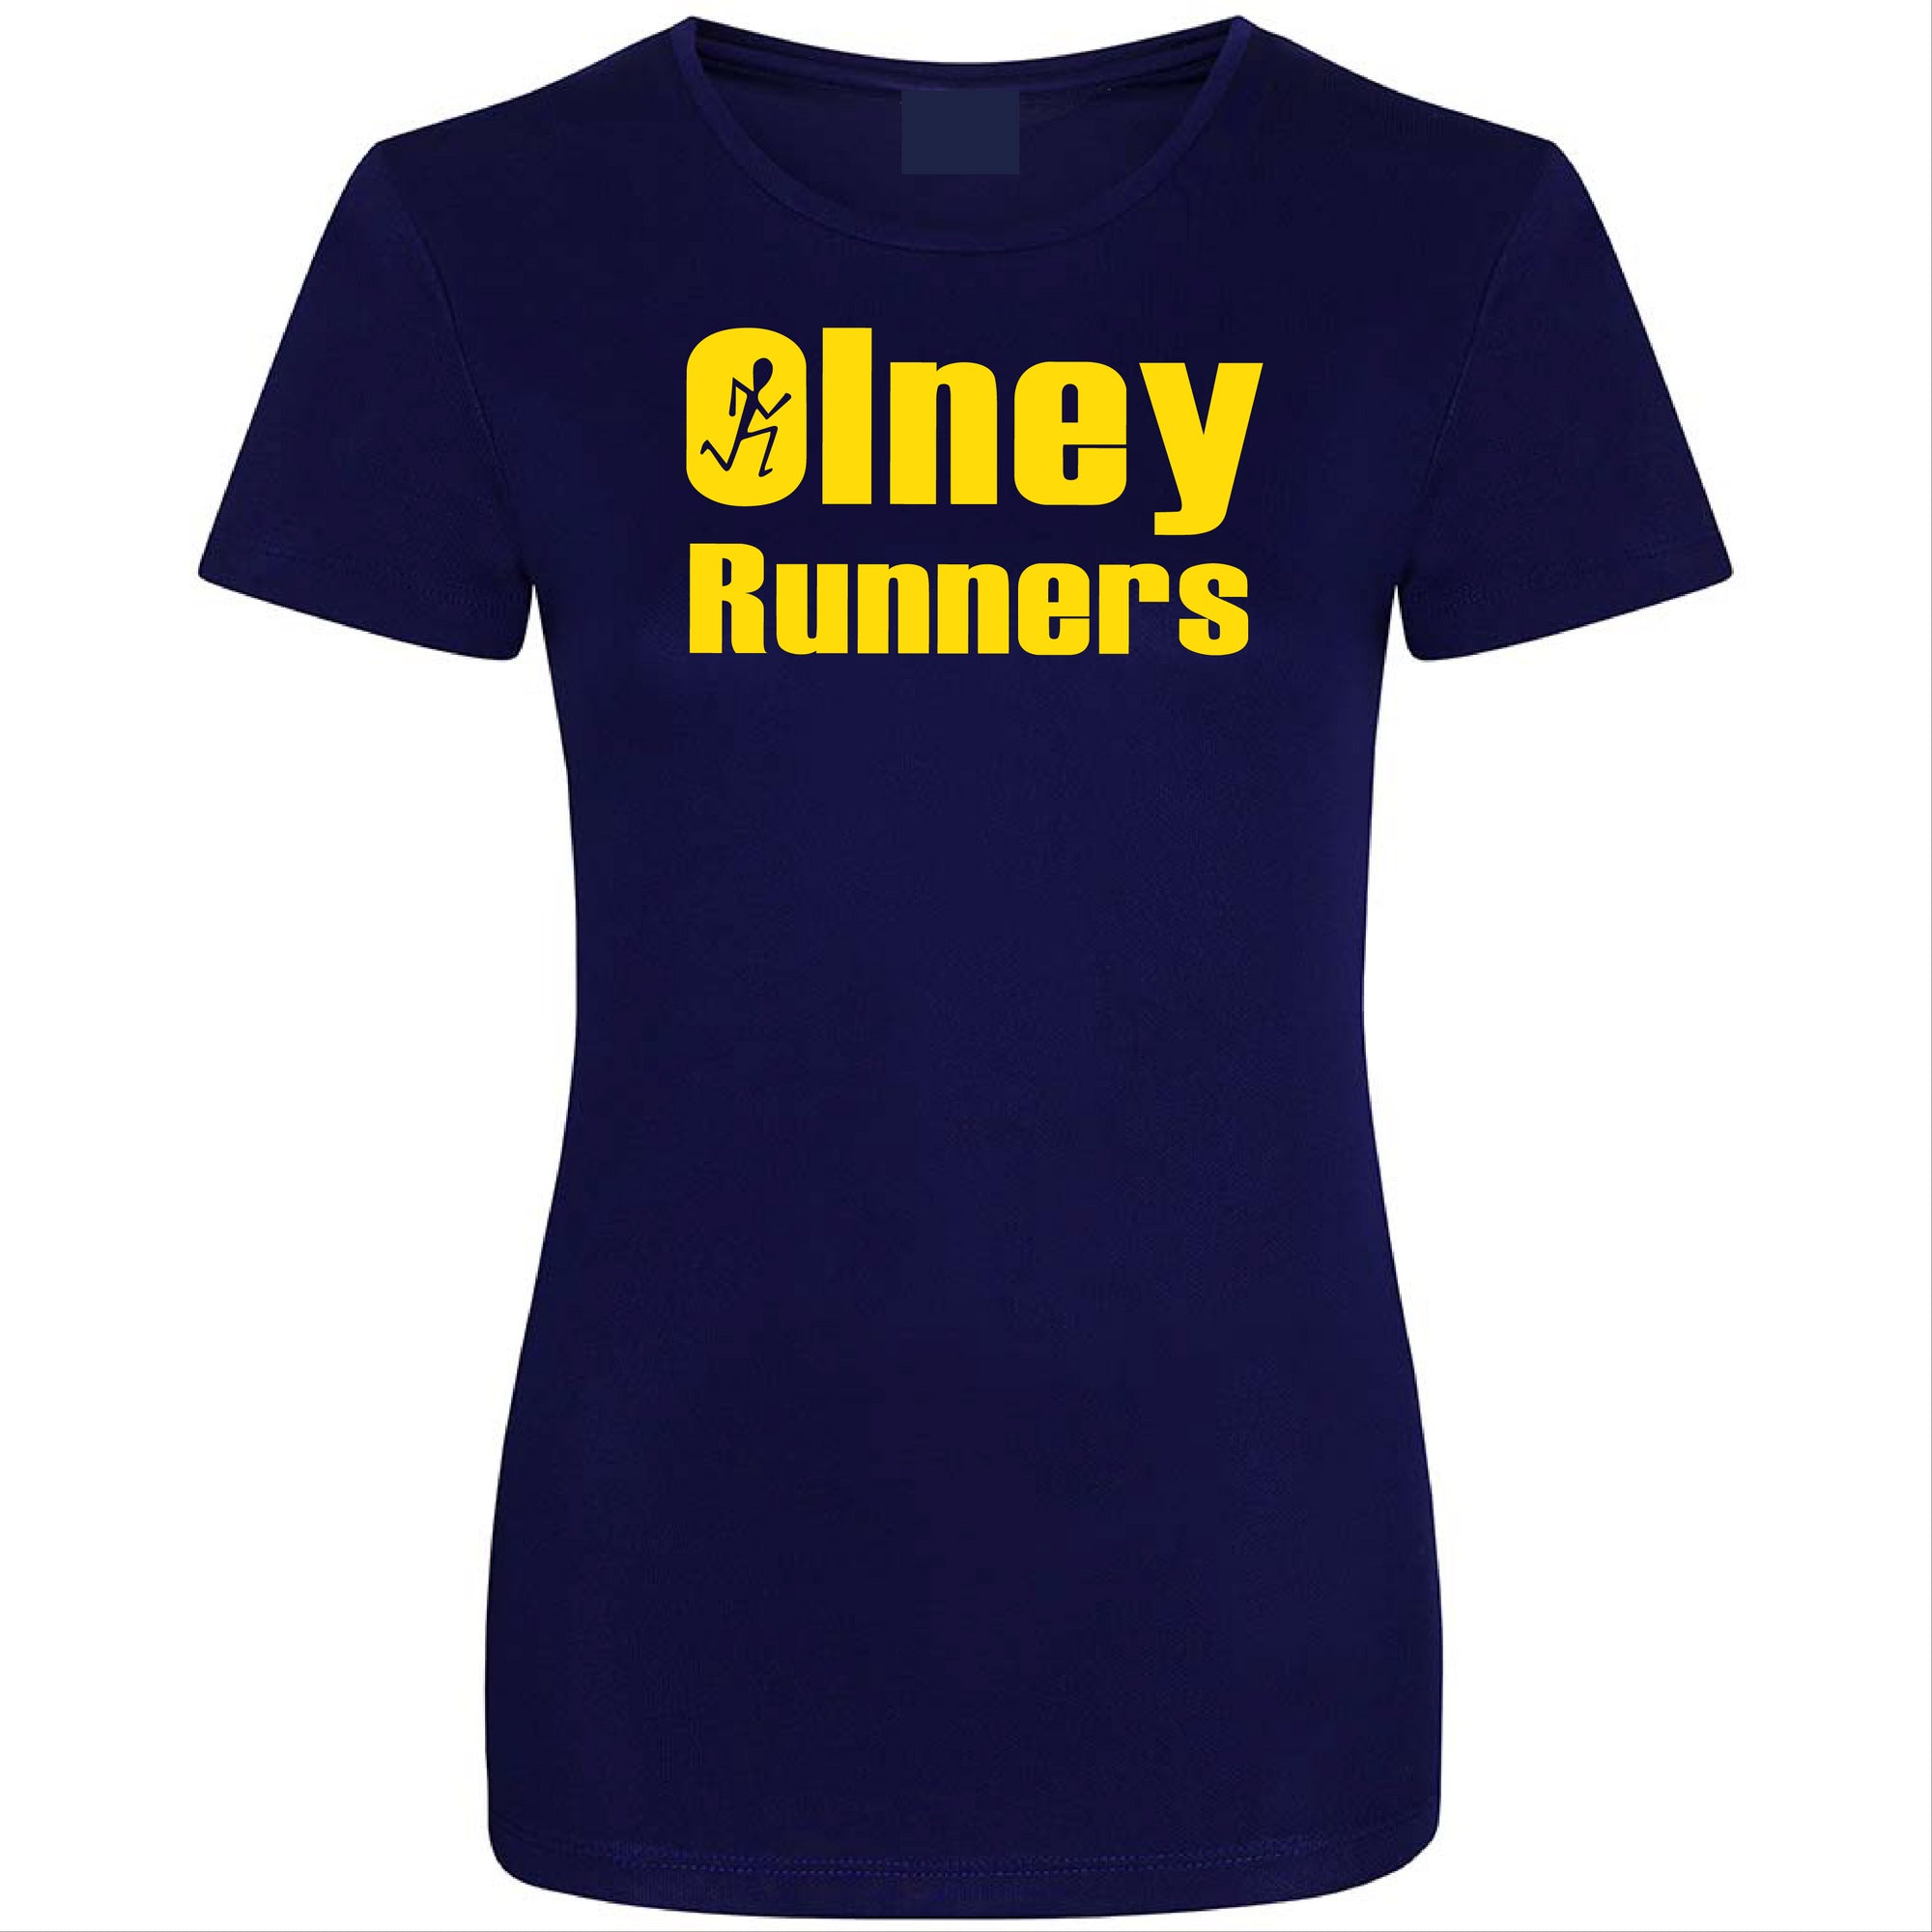 Olney Runners Ladies Technical Training T-shirt - French navy